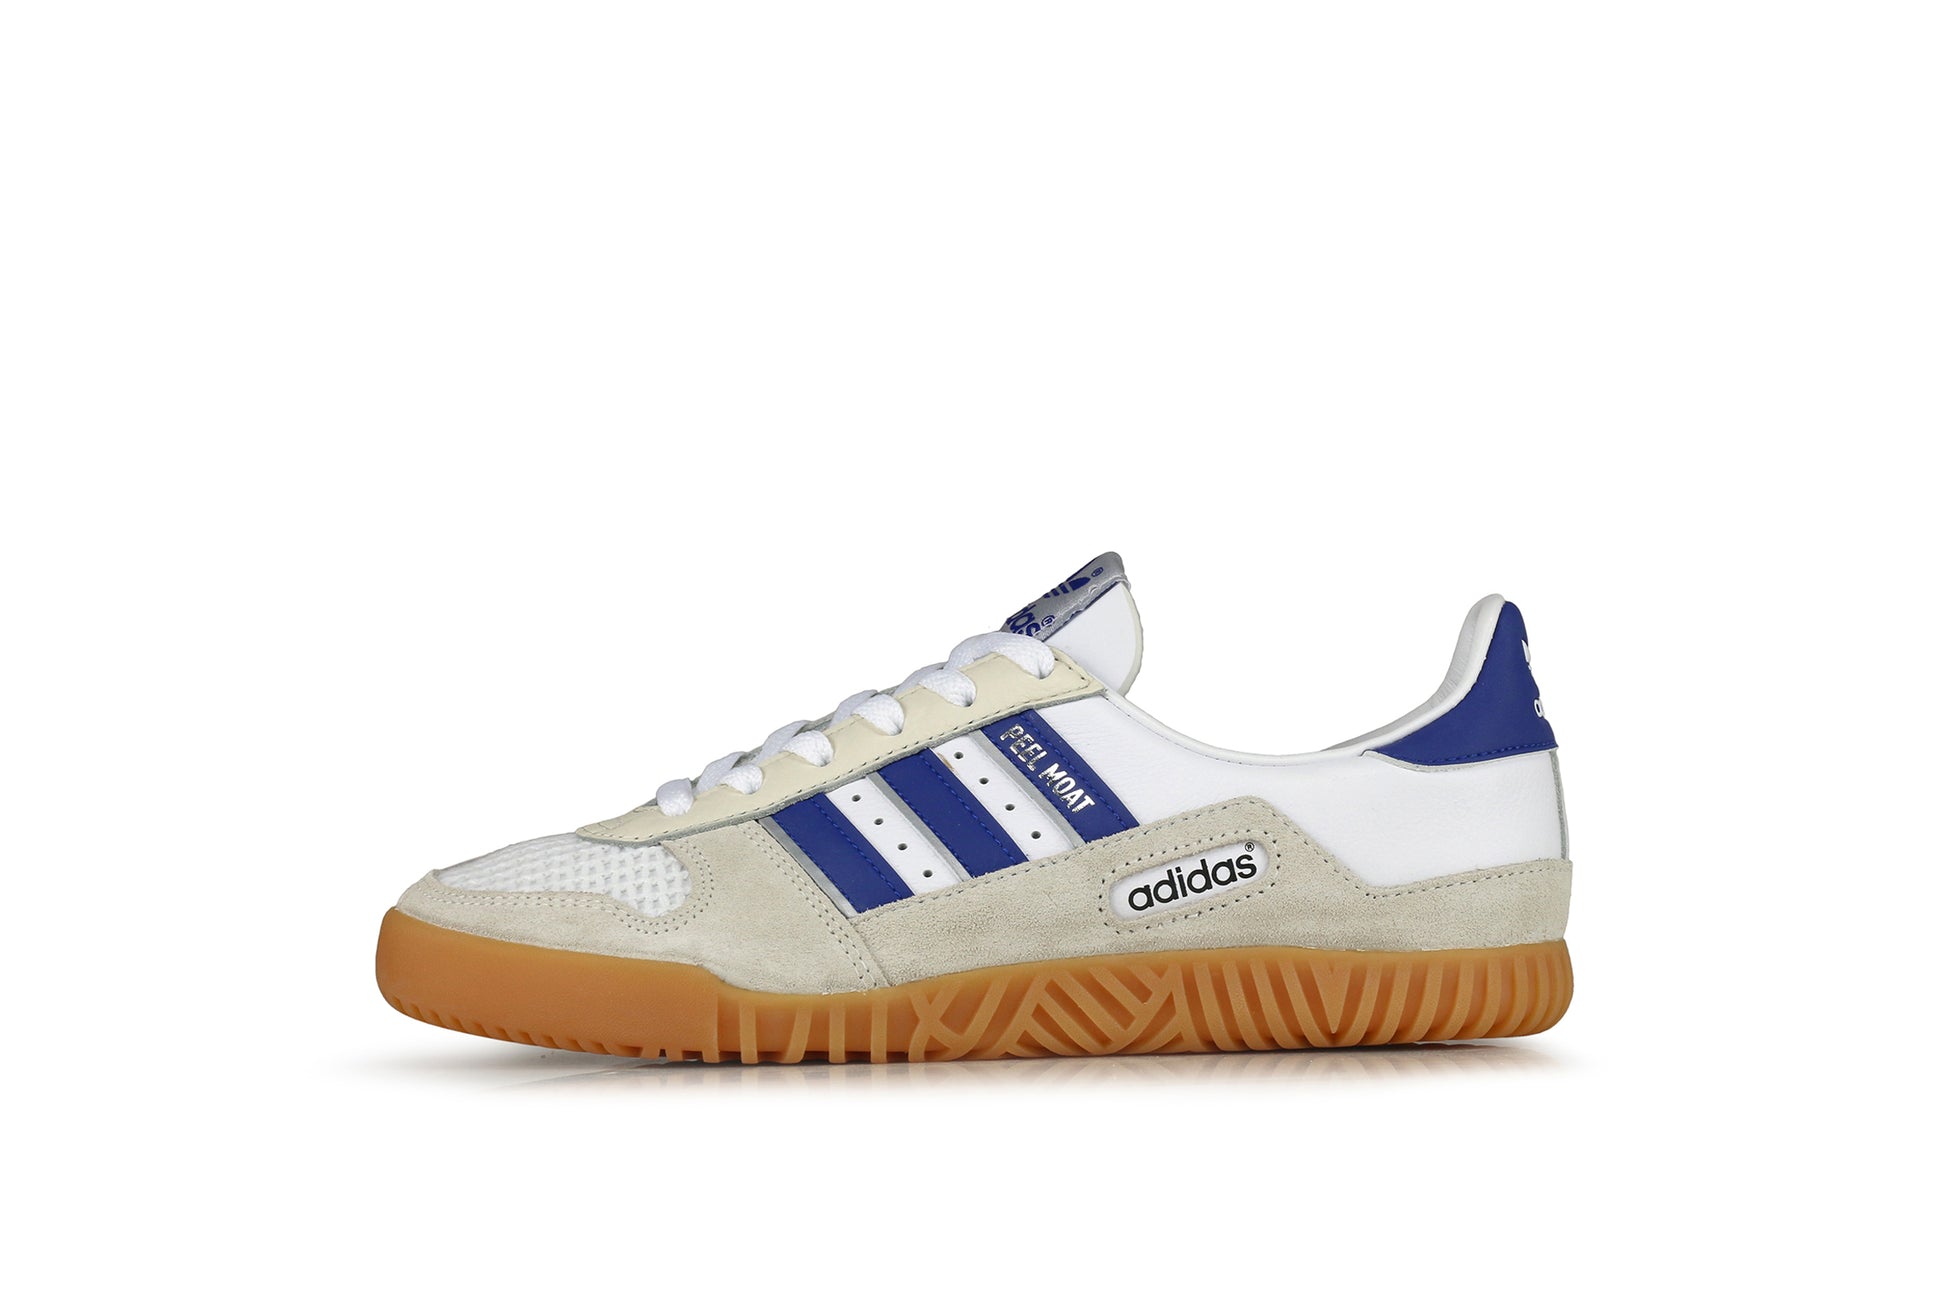 adidas shoes superstars gold price list india 2018